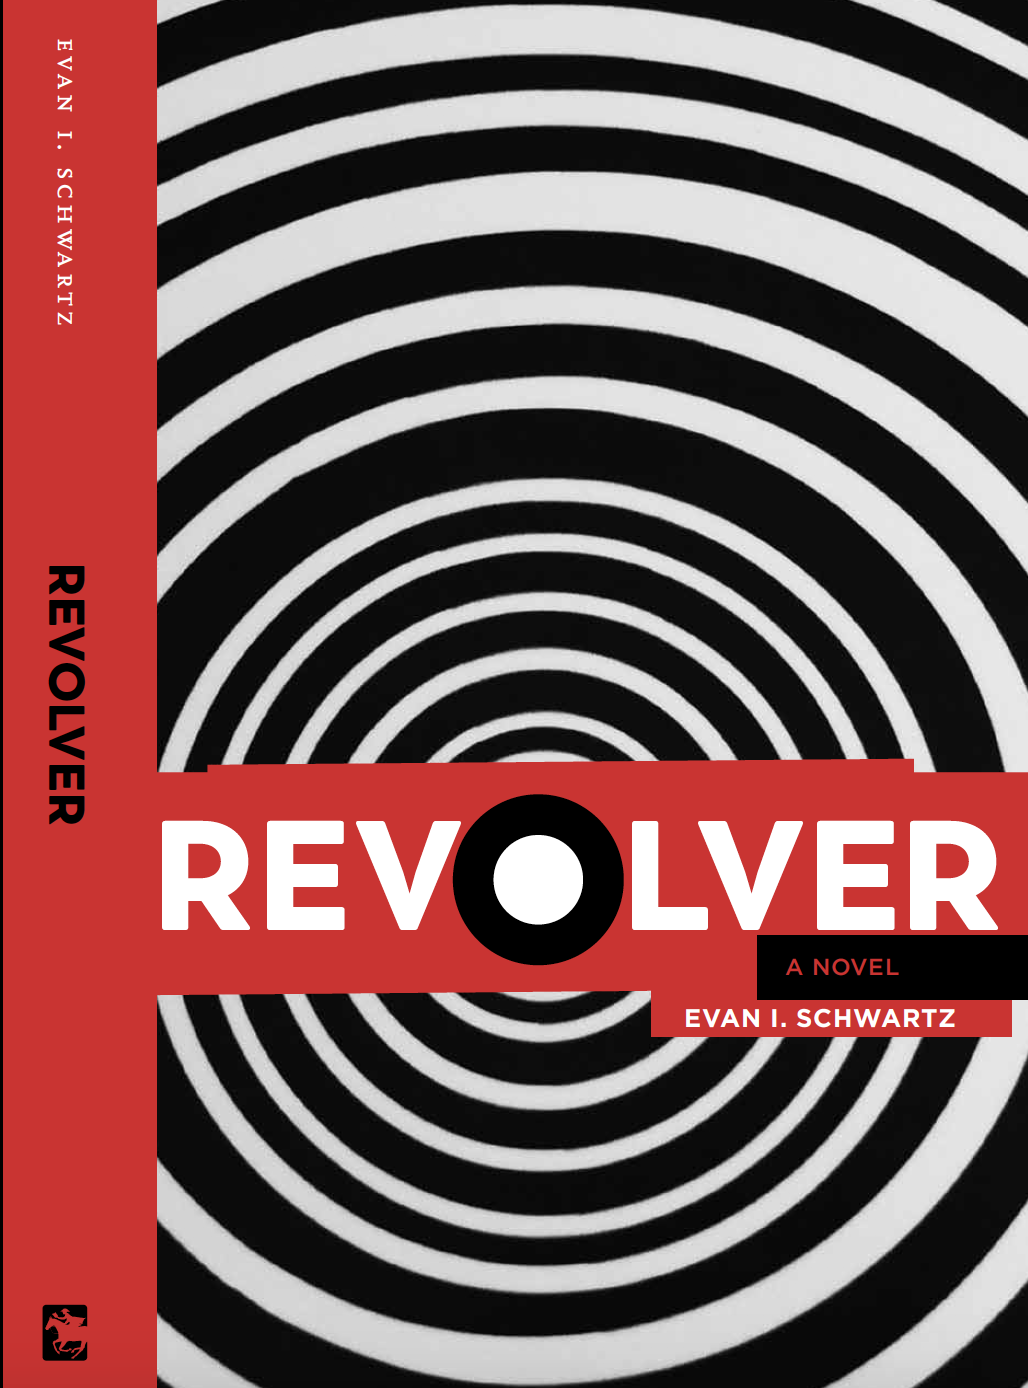 Revolver cover with bind.png